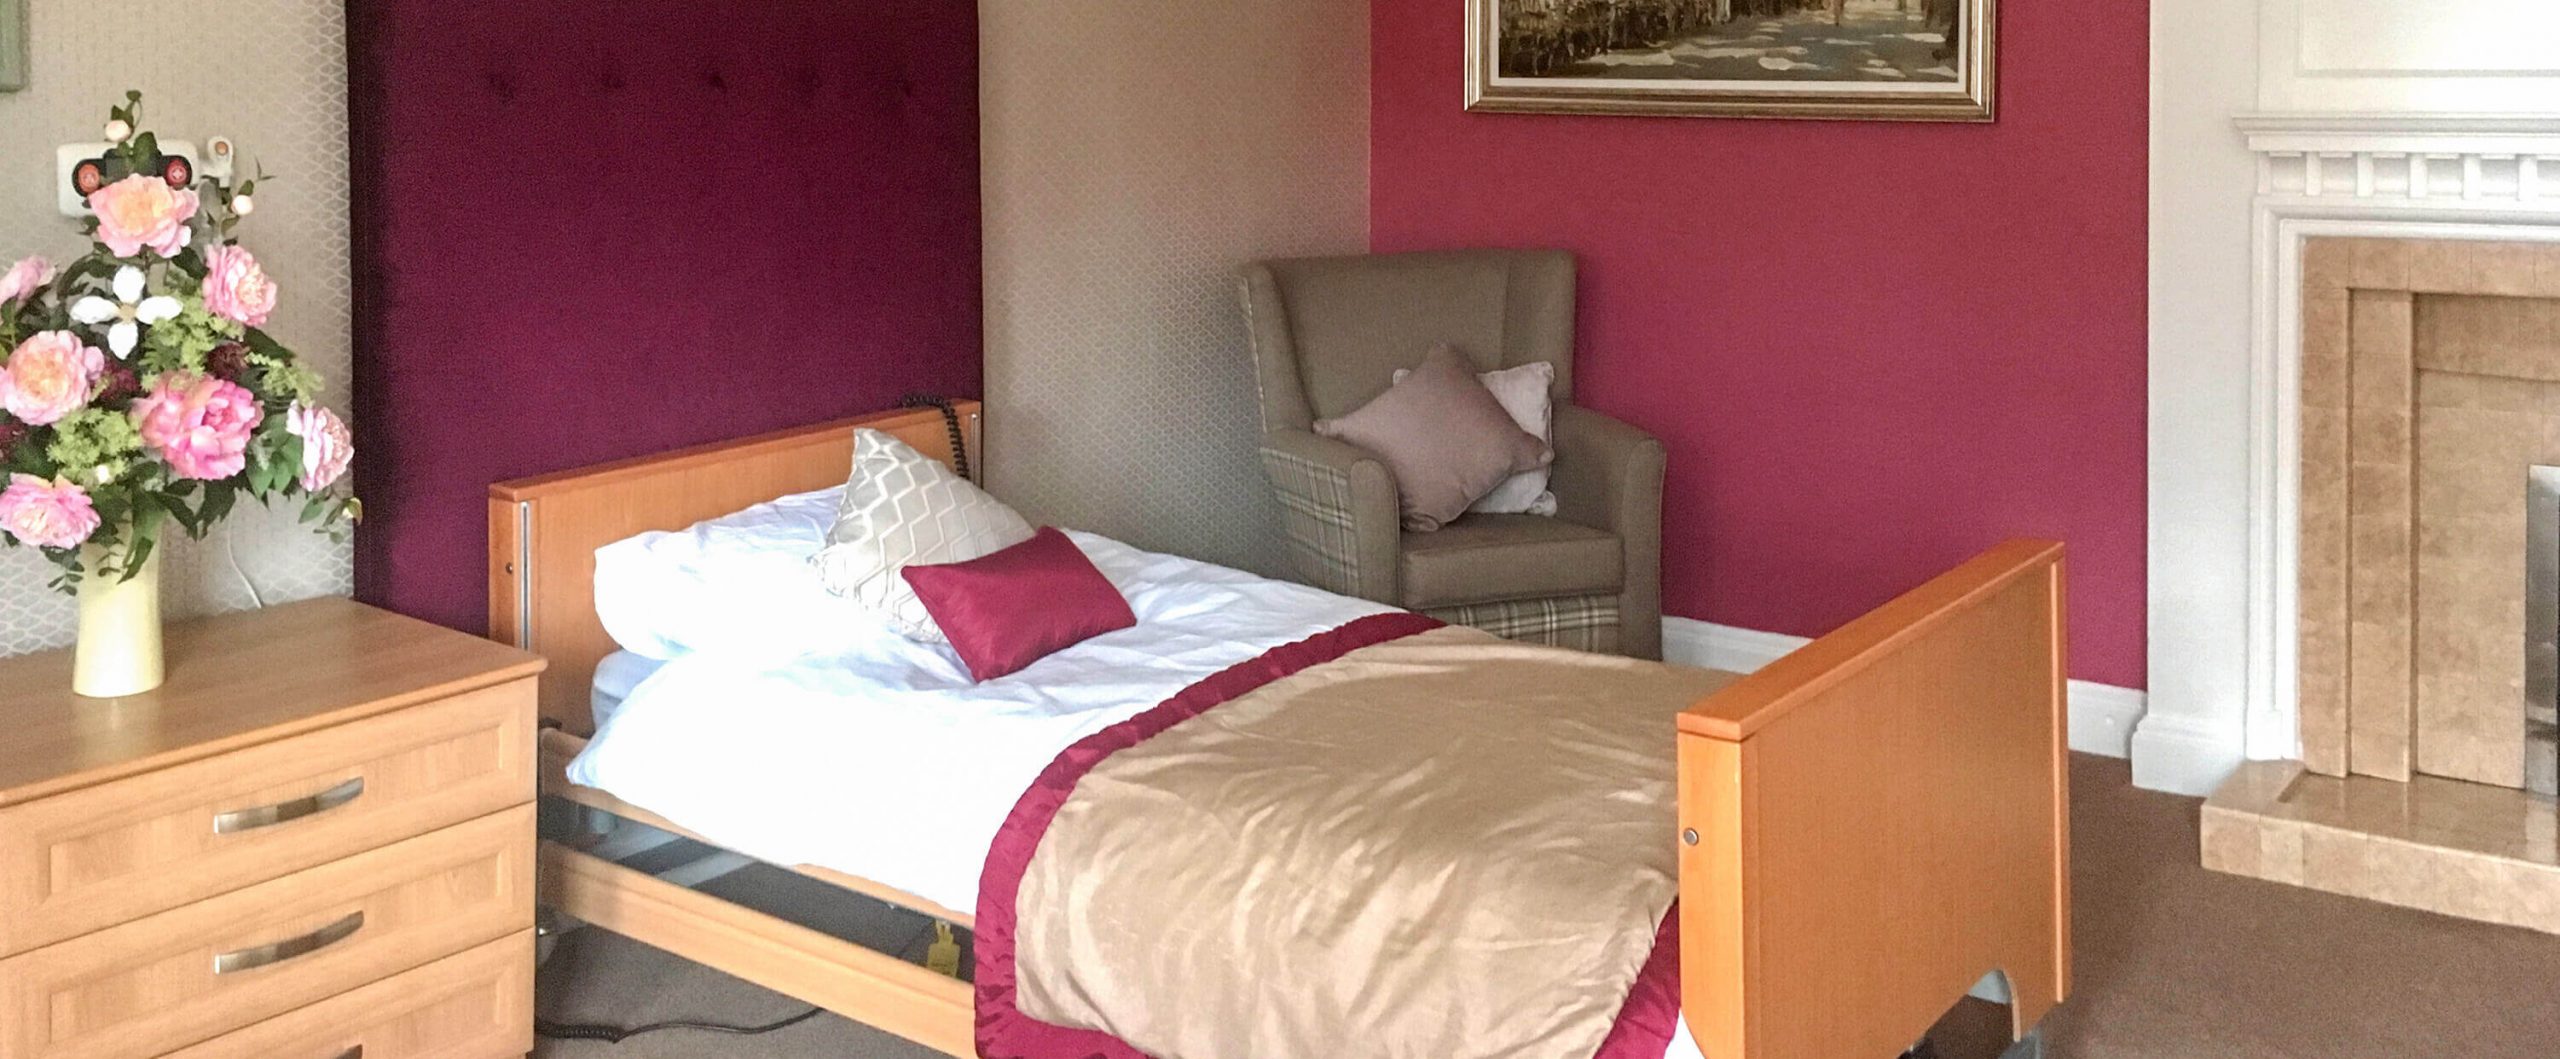 Field House Care Home accommodation